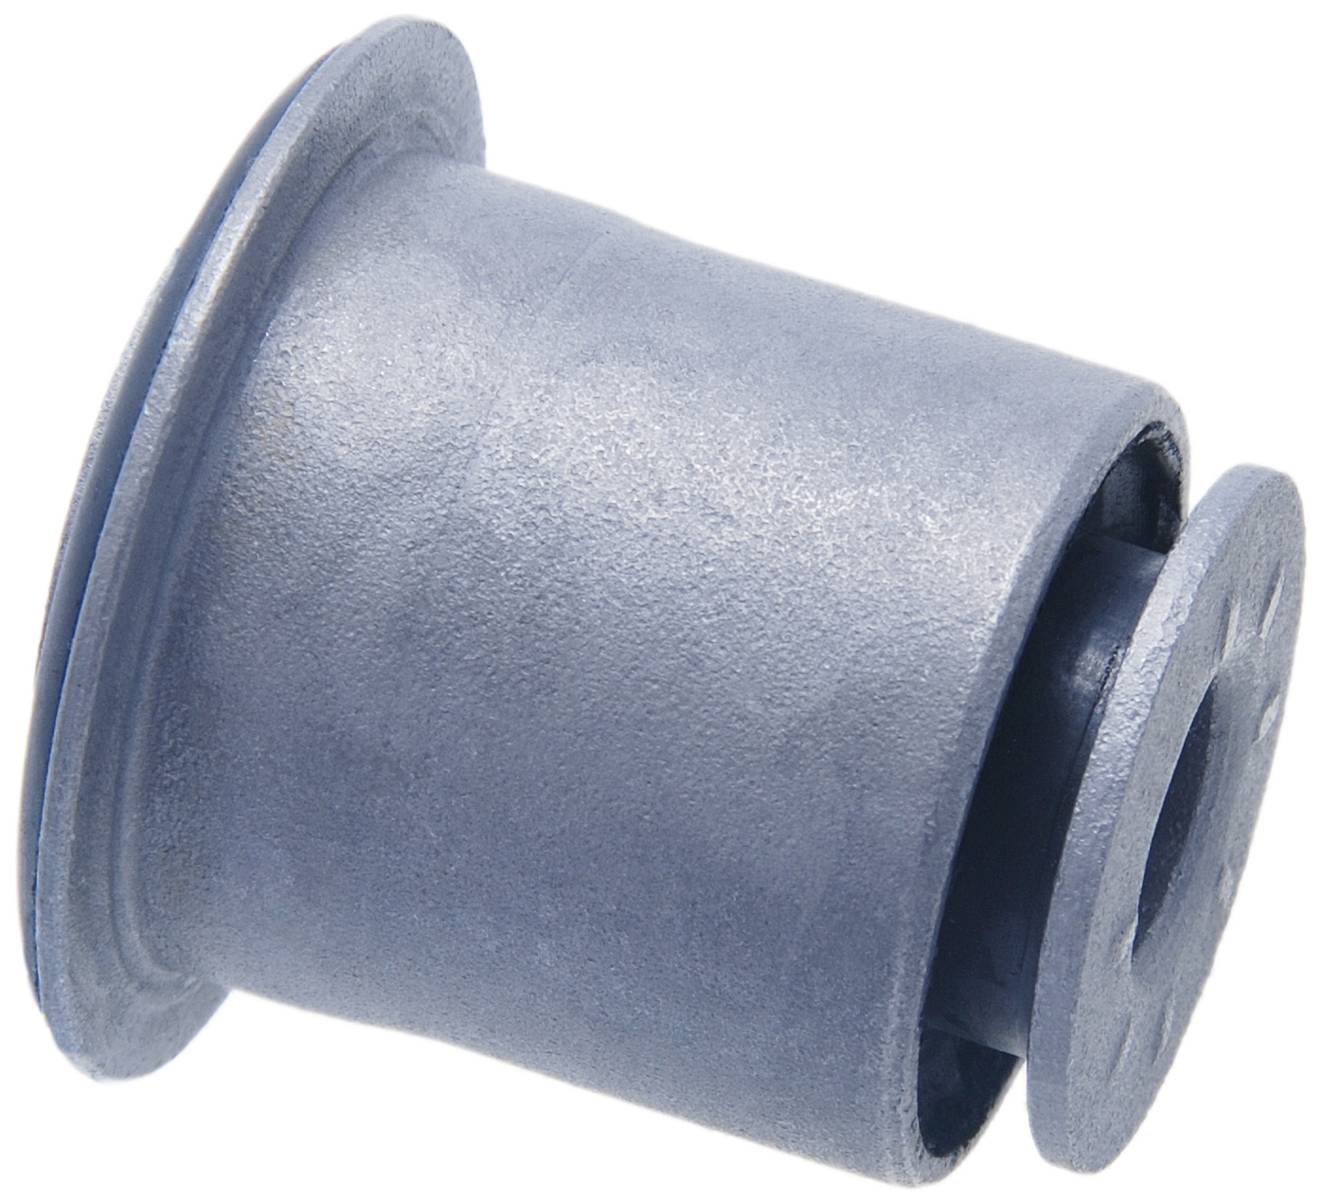 Suspension Knuckle Bushing Rear ACDelco Pro 45G31015 fits 08-12 Cadillac CTS